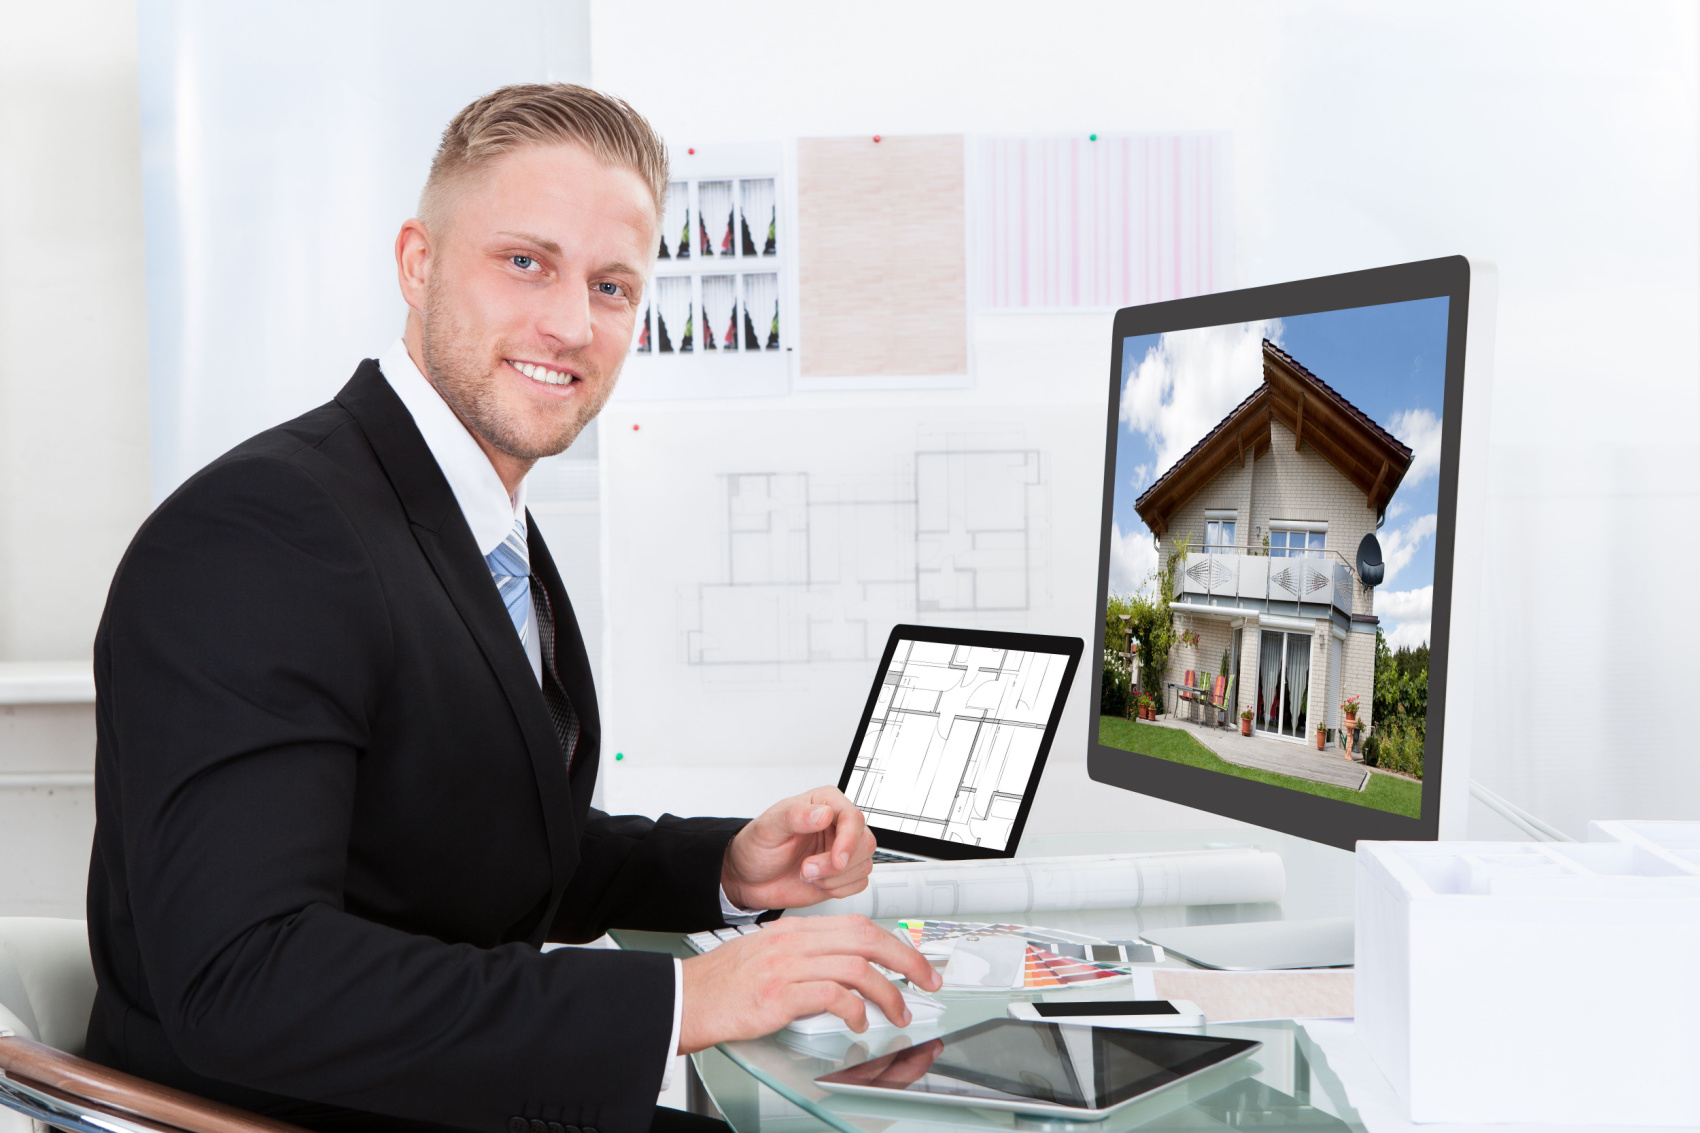 Real estate professional utilizing a digital tools to promote his real estate properties.